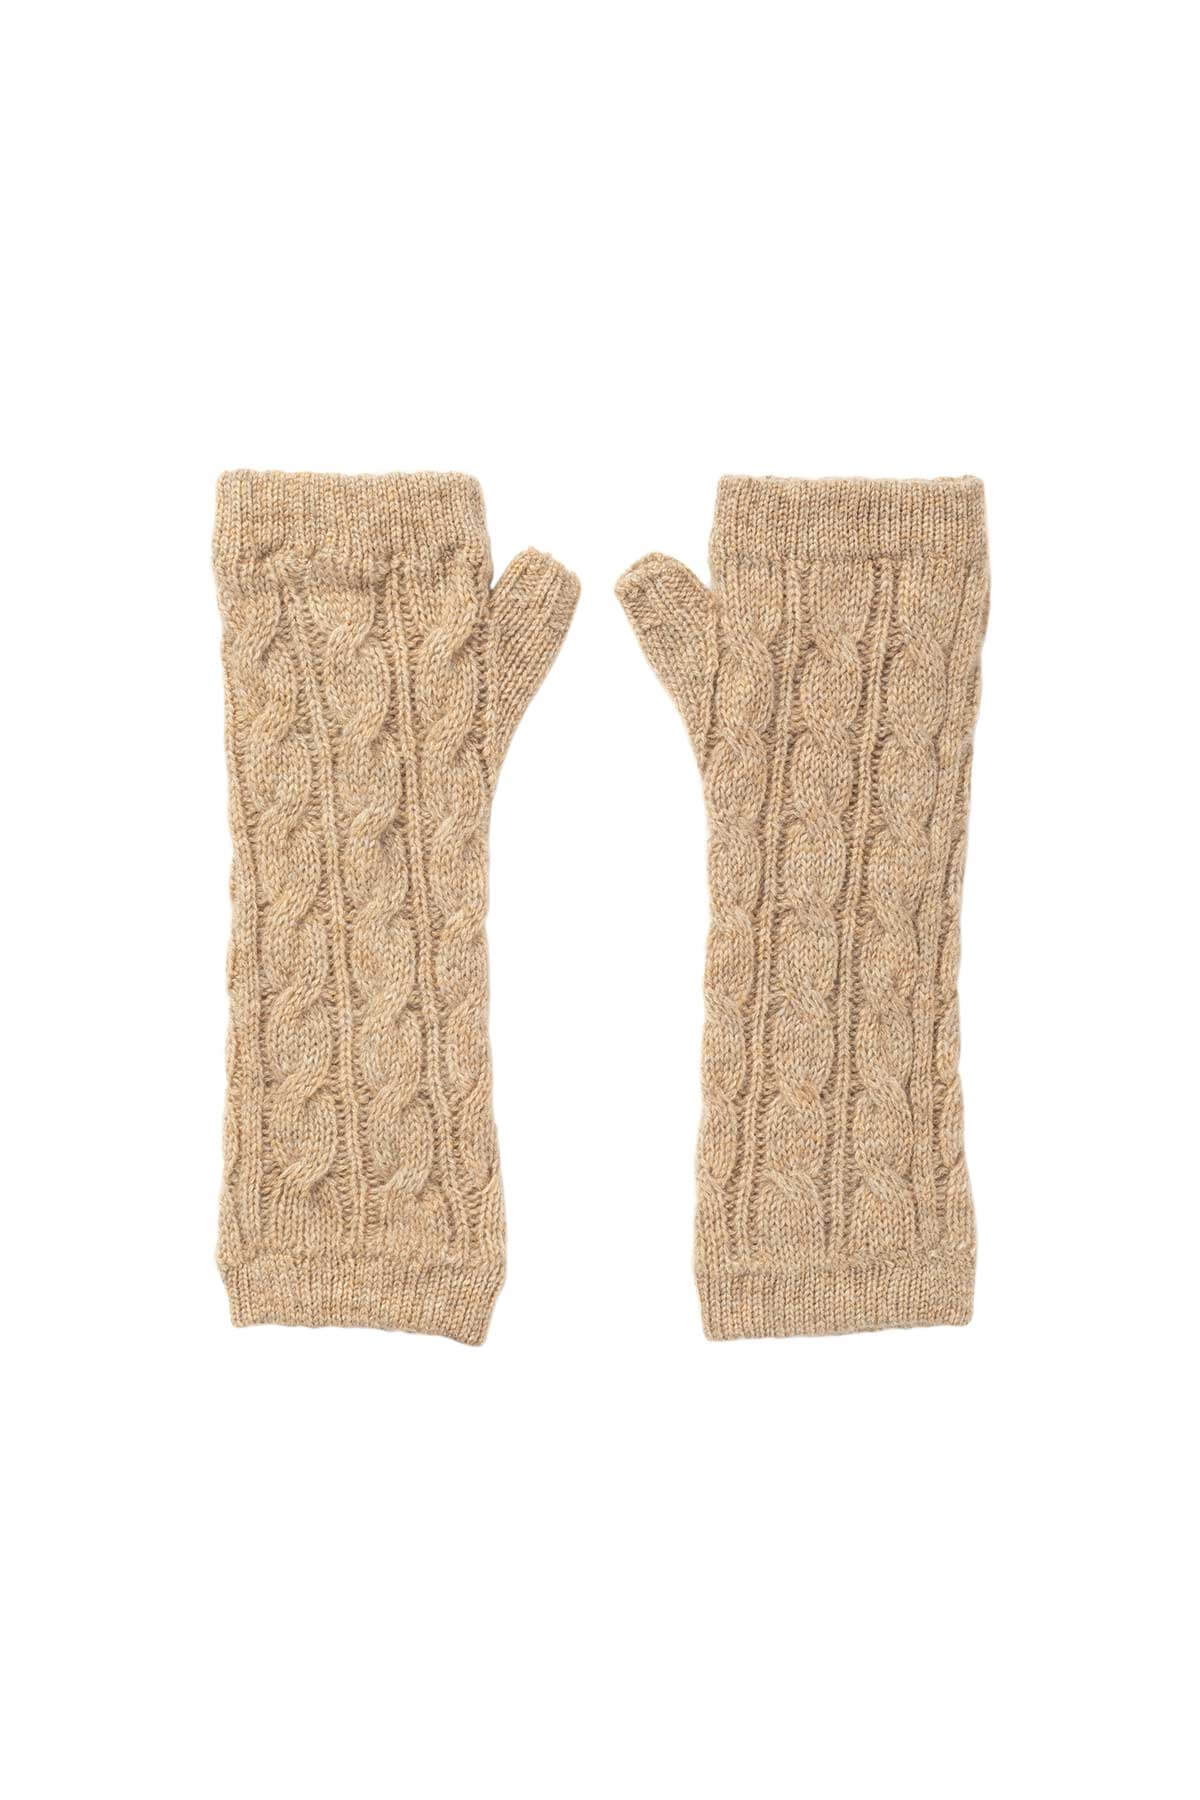 Johnstons of Elgin’s Oatmeal Cashmere Gauzy Cable Wrist Warmers on a white background HAY03305HB0210